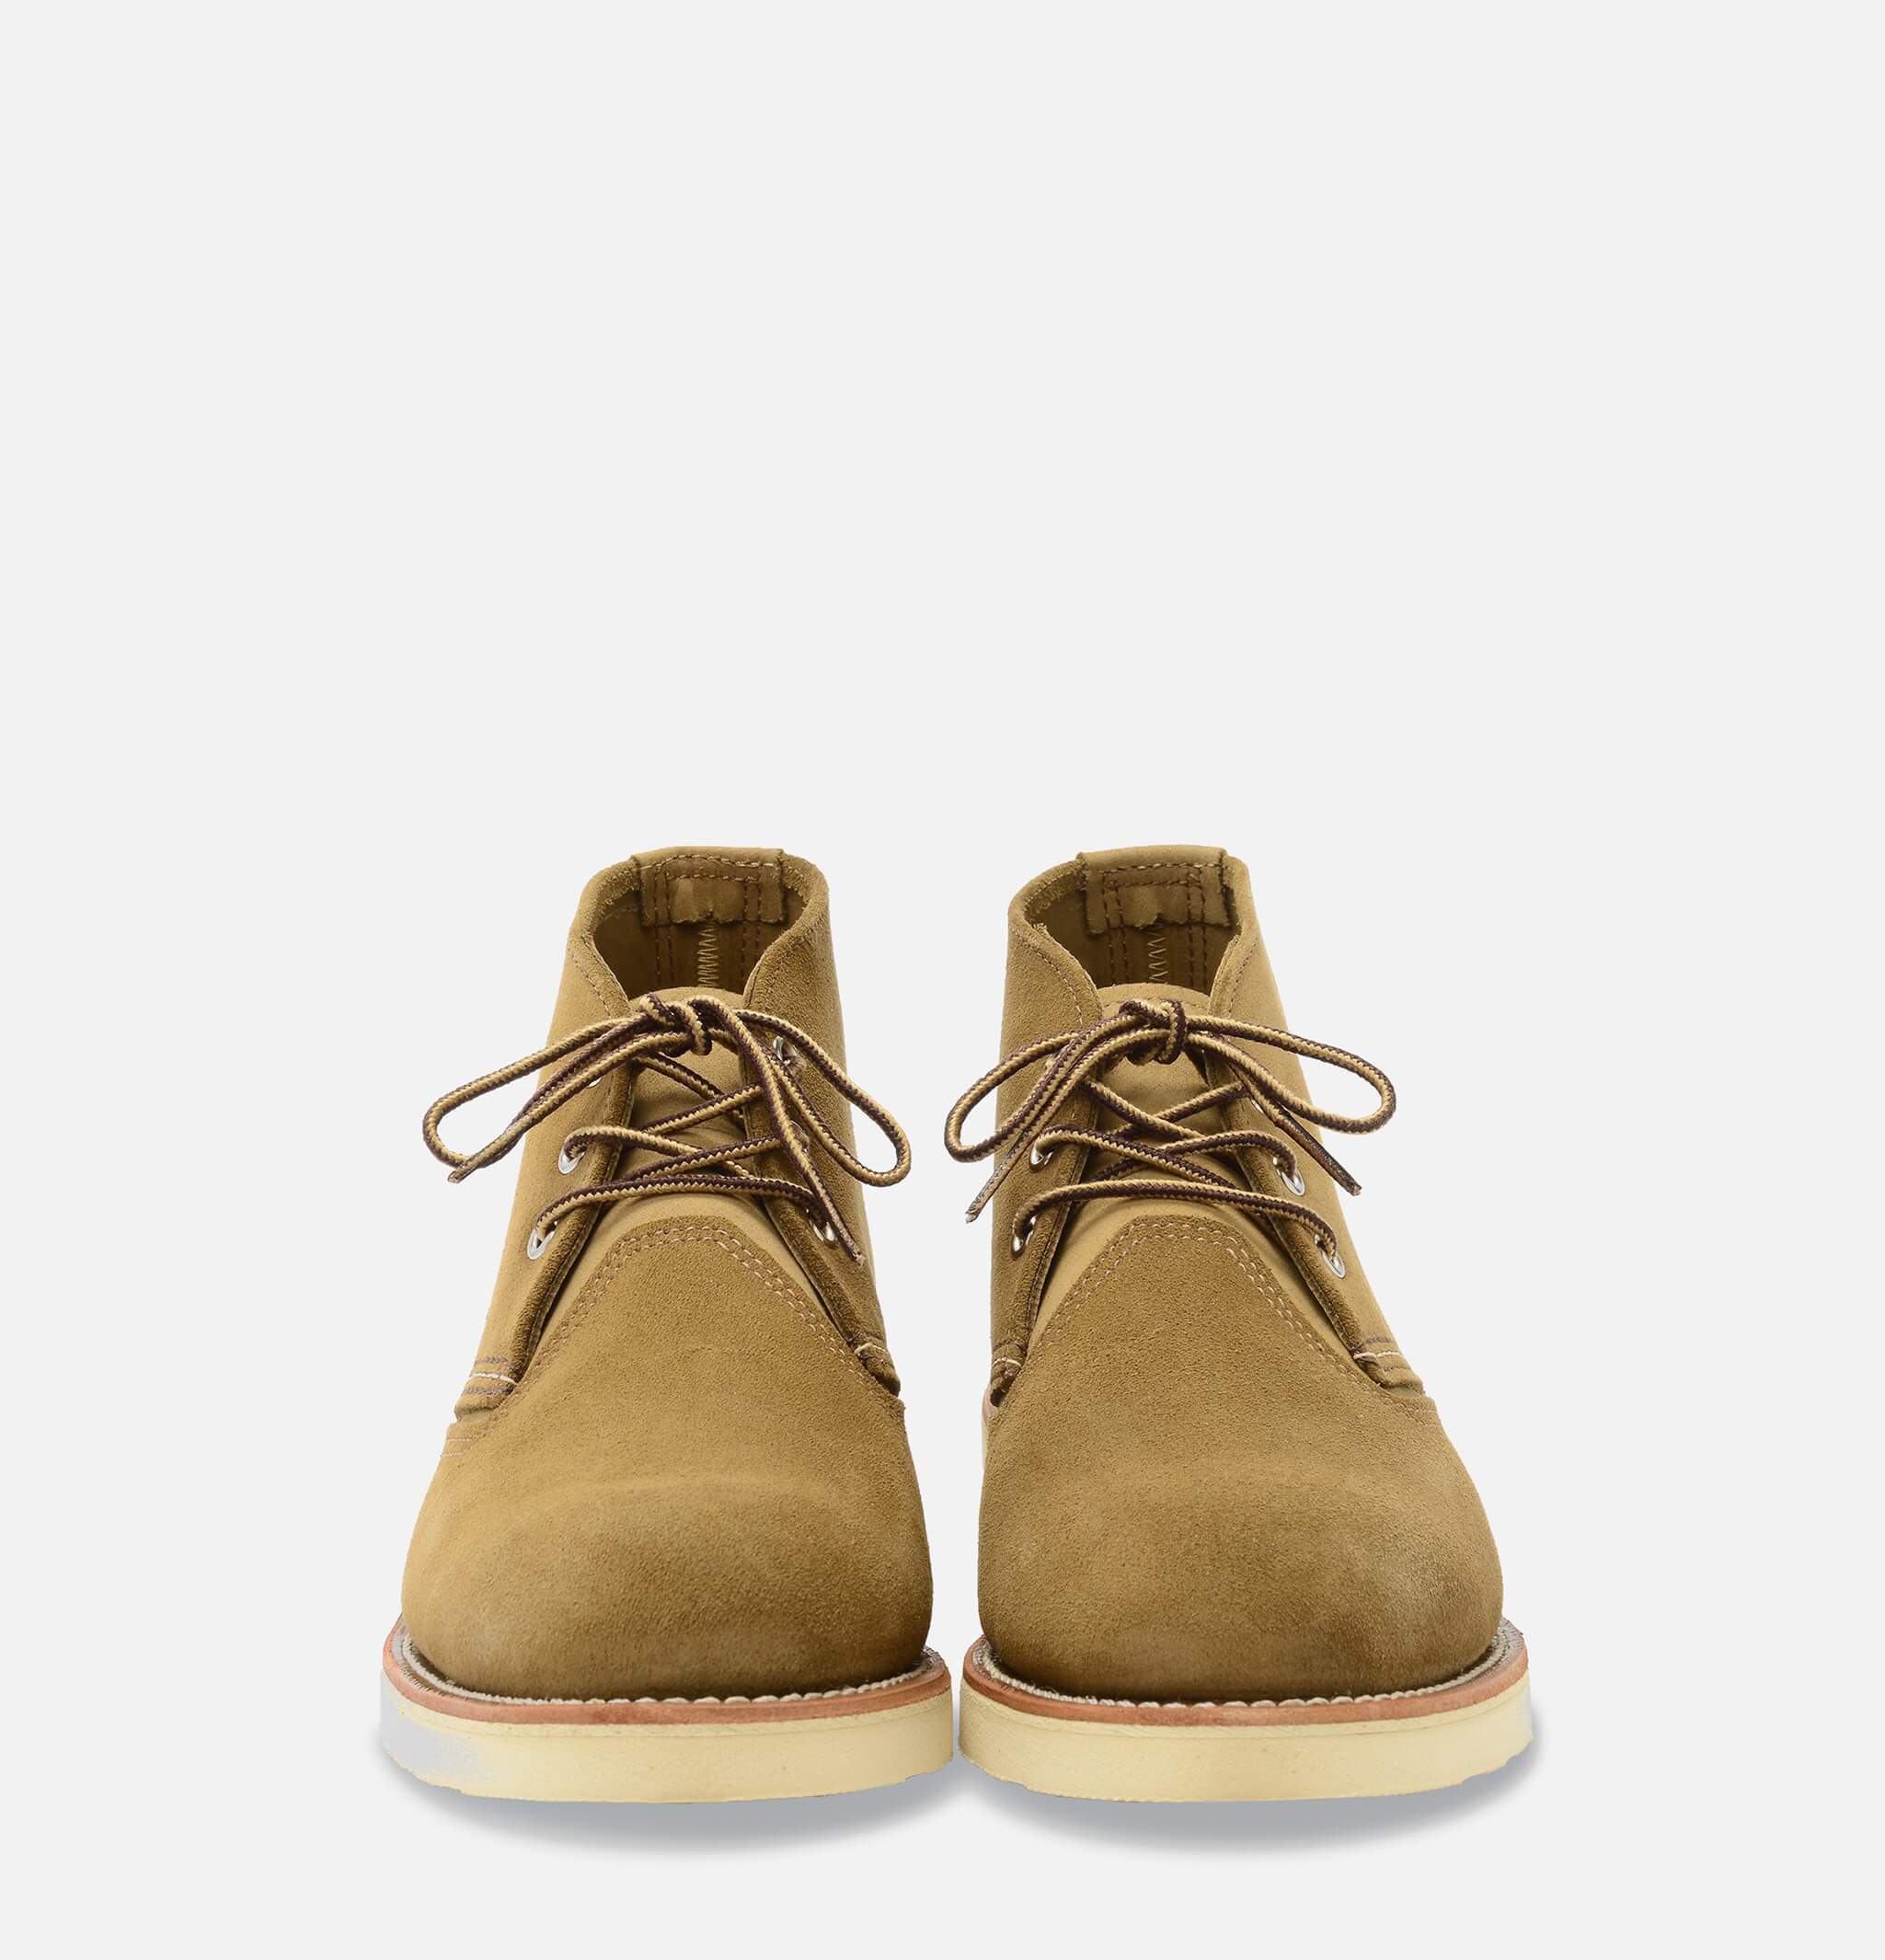 Red Wing Shoes - 3149 - Work Chukka - Olive Mohave